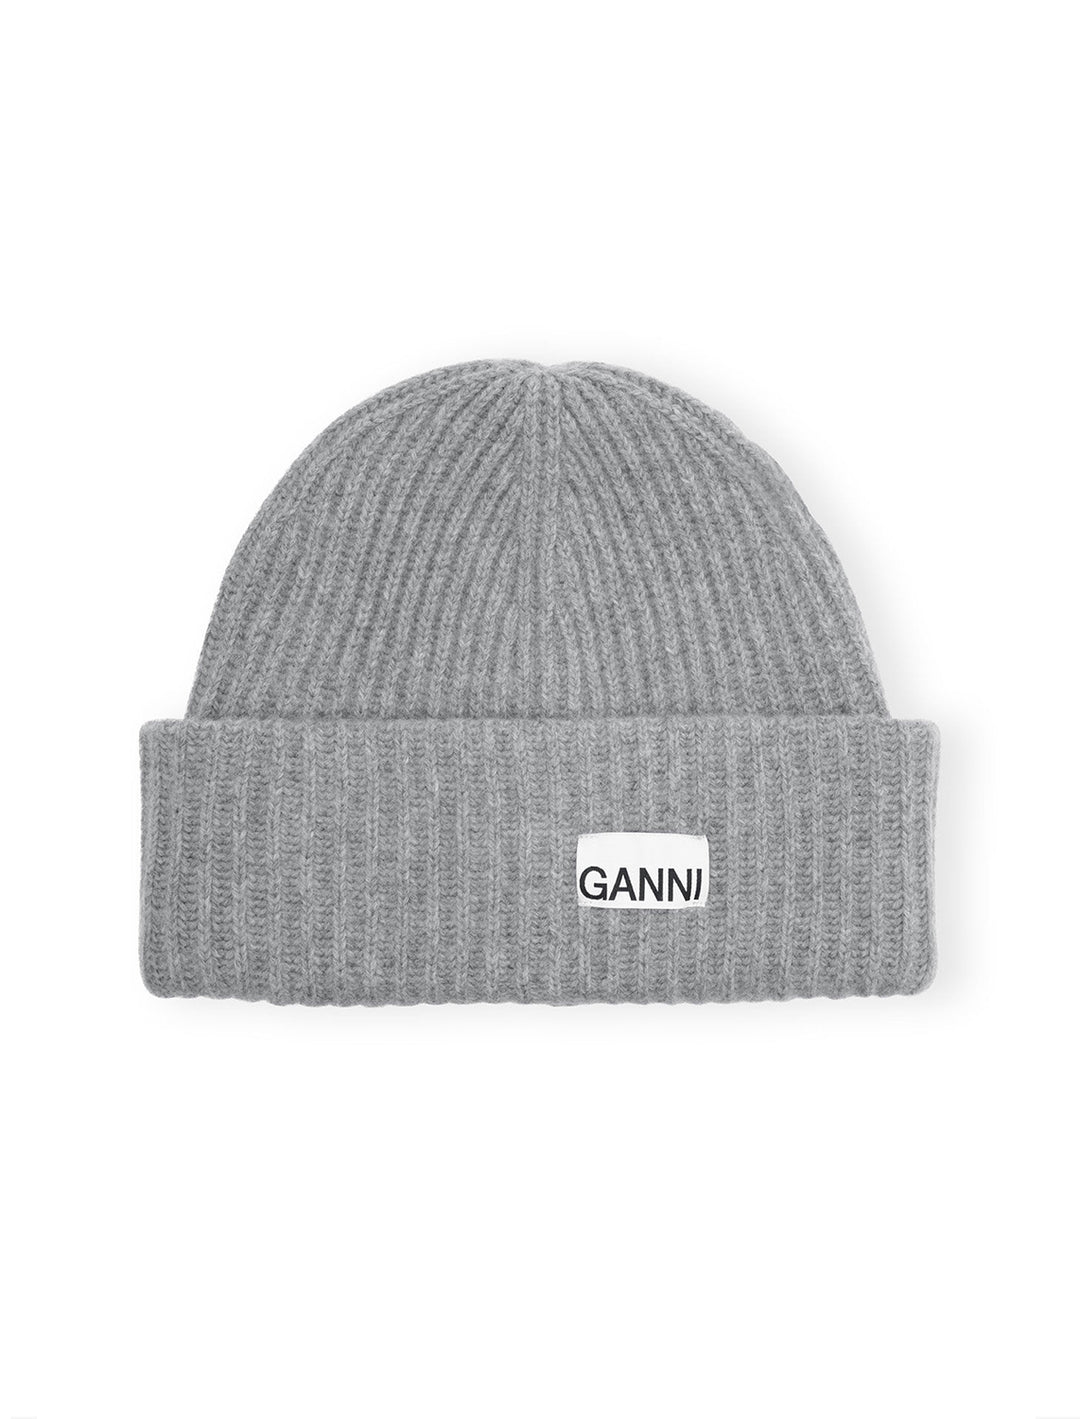 Overhead view of GANNI's structured rib beanie in paloma melange.